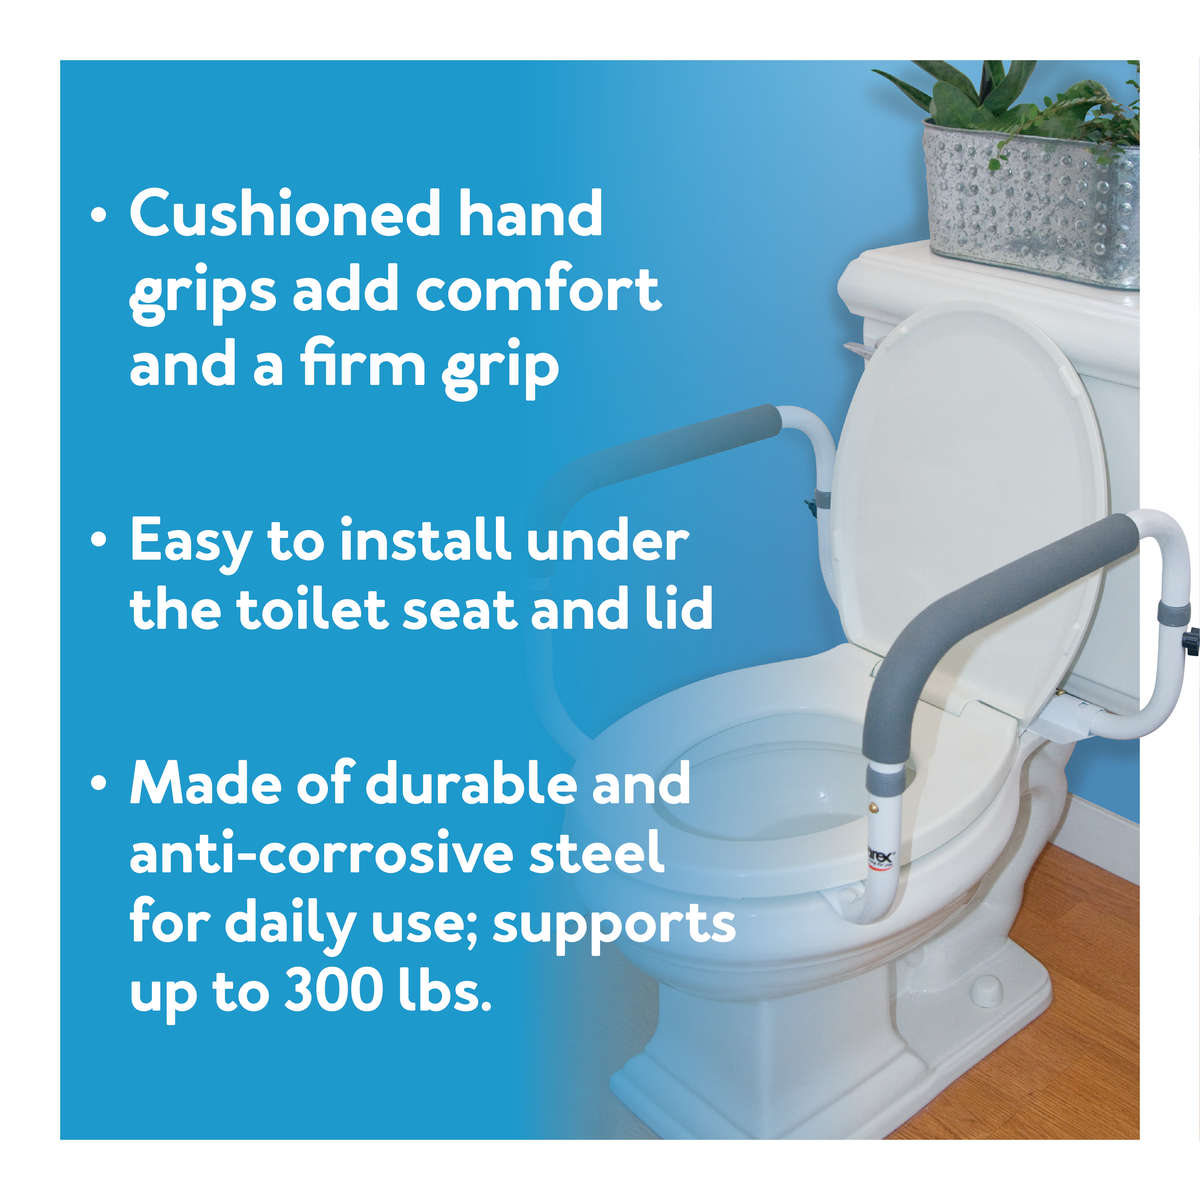 An image of the Carex Support Rail with details showing its cushioned hand grip, further details are provided below